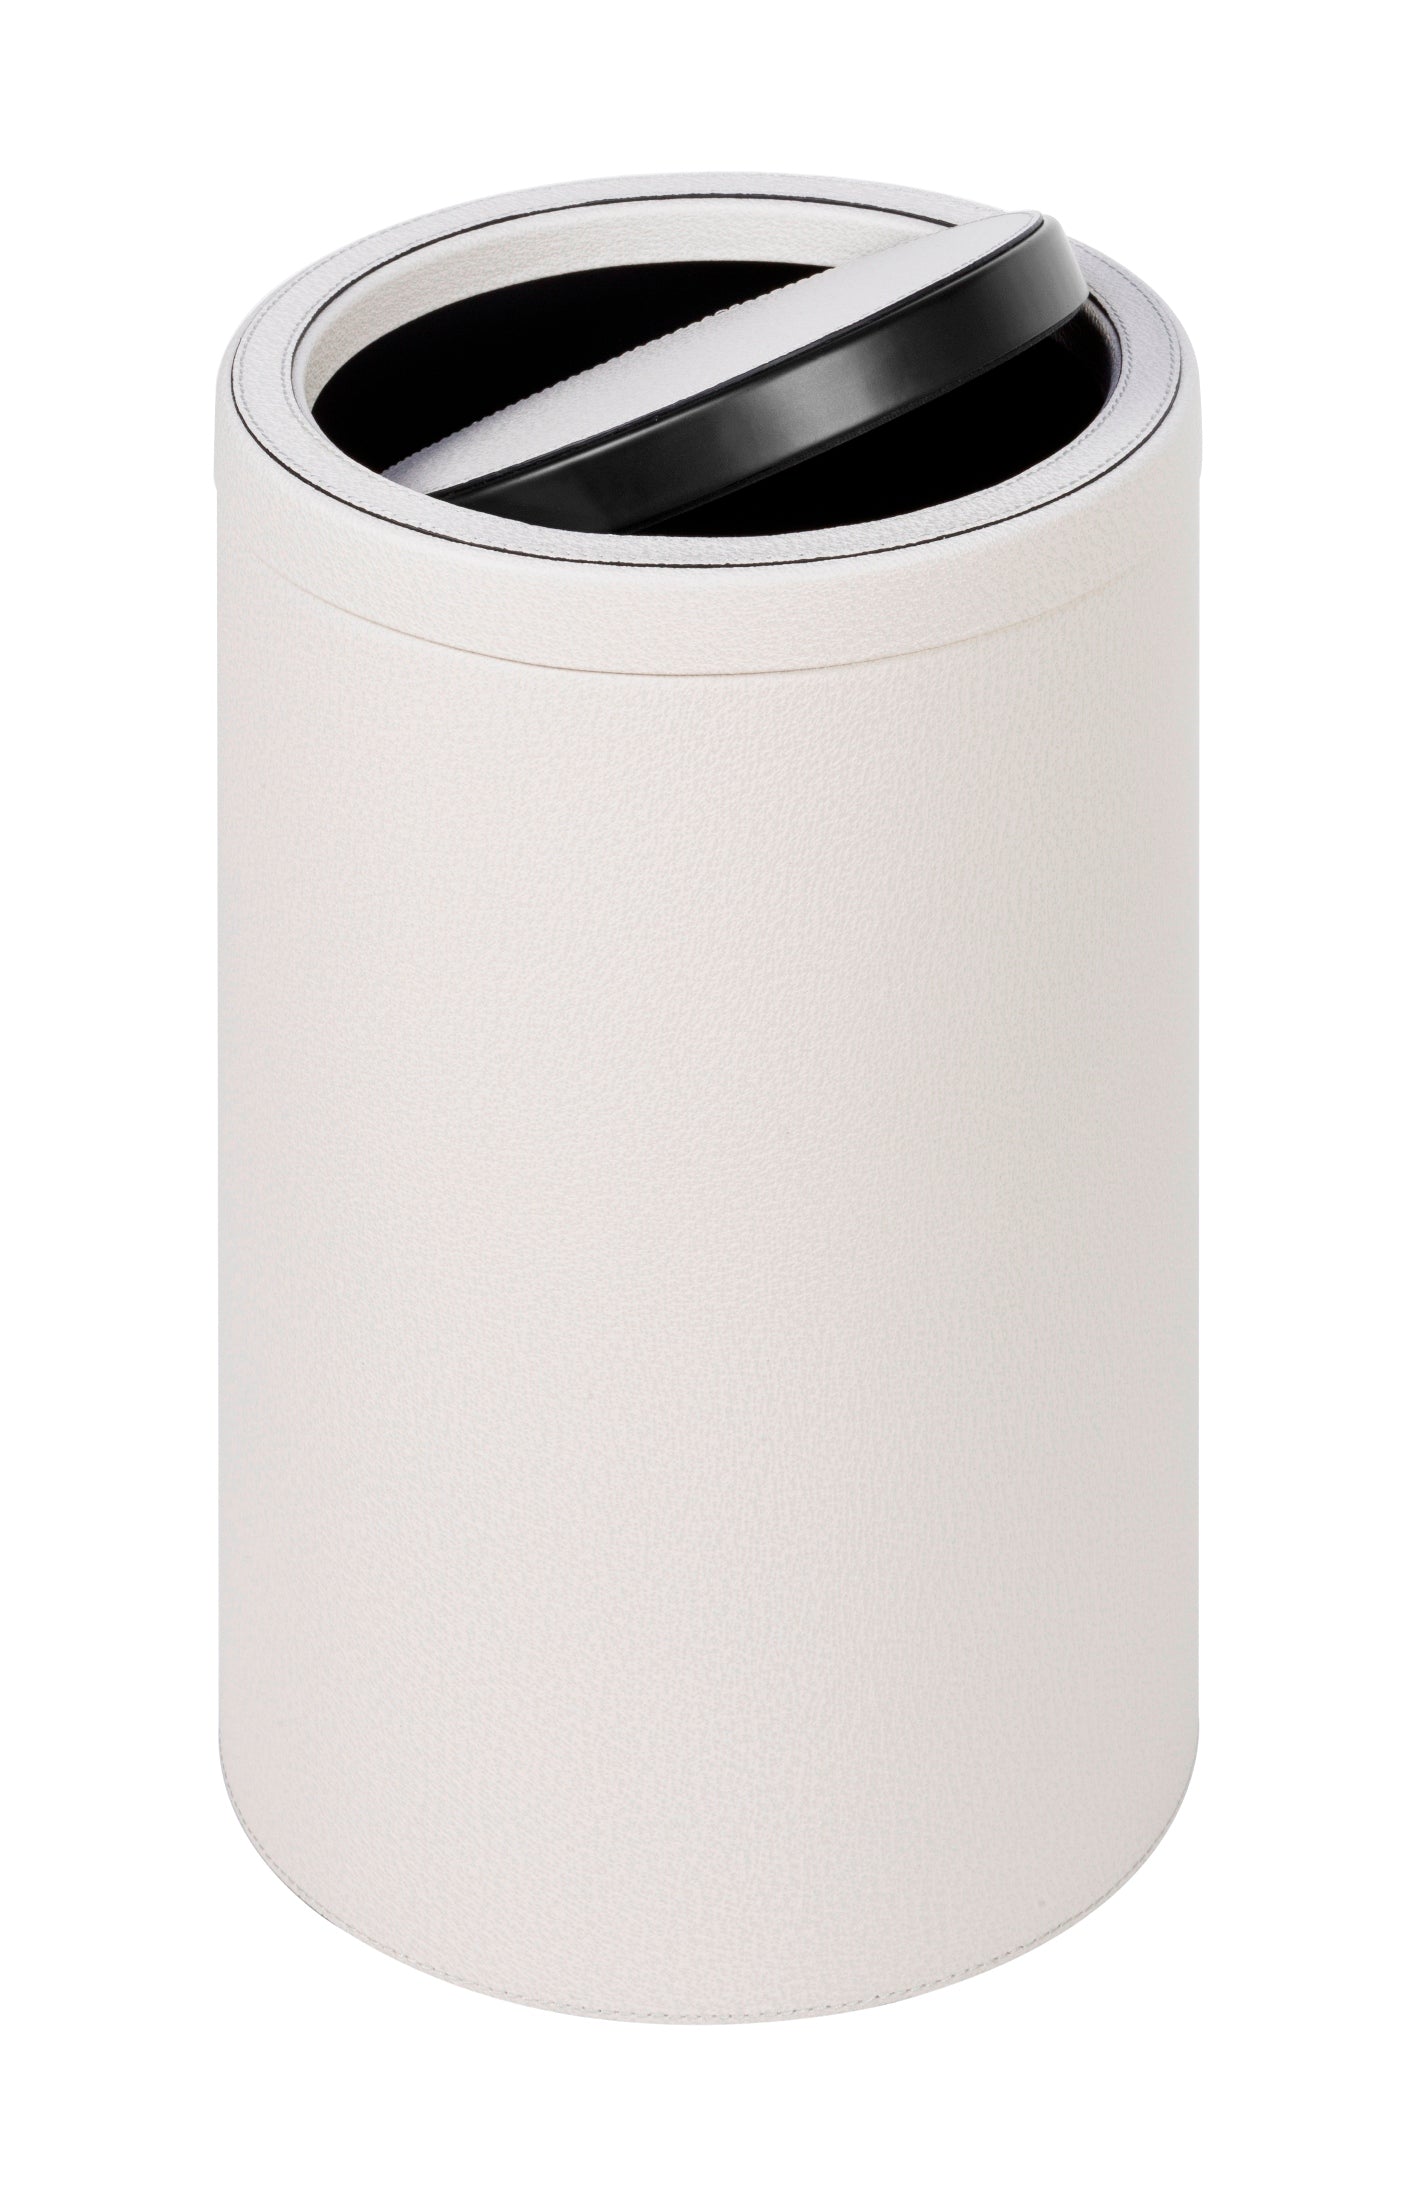 Giobagnara Swing Leather-Covered Metal Wastepaper Bin With Removable Lid | Stylish metal wastepaper bin covered in luxurious leather | Comes with a convenient removable lid | Explore exquisite home accessories at 2Jour Concierge, #1 luxury high-end gift & lifestyle shop